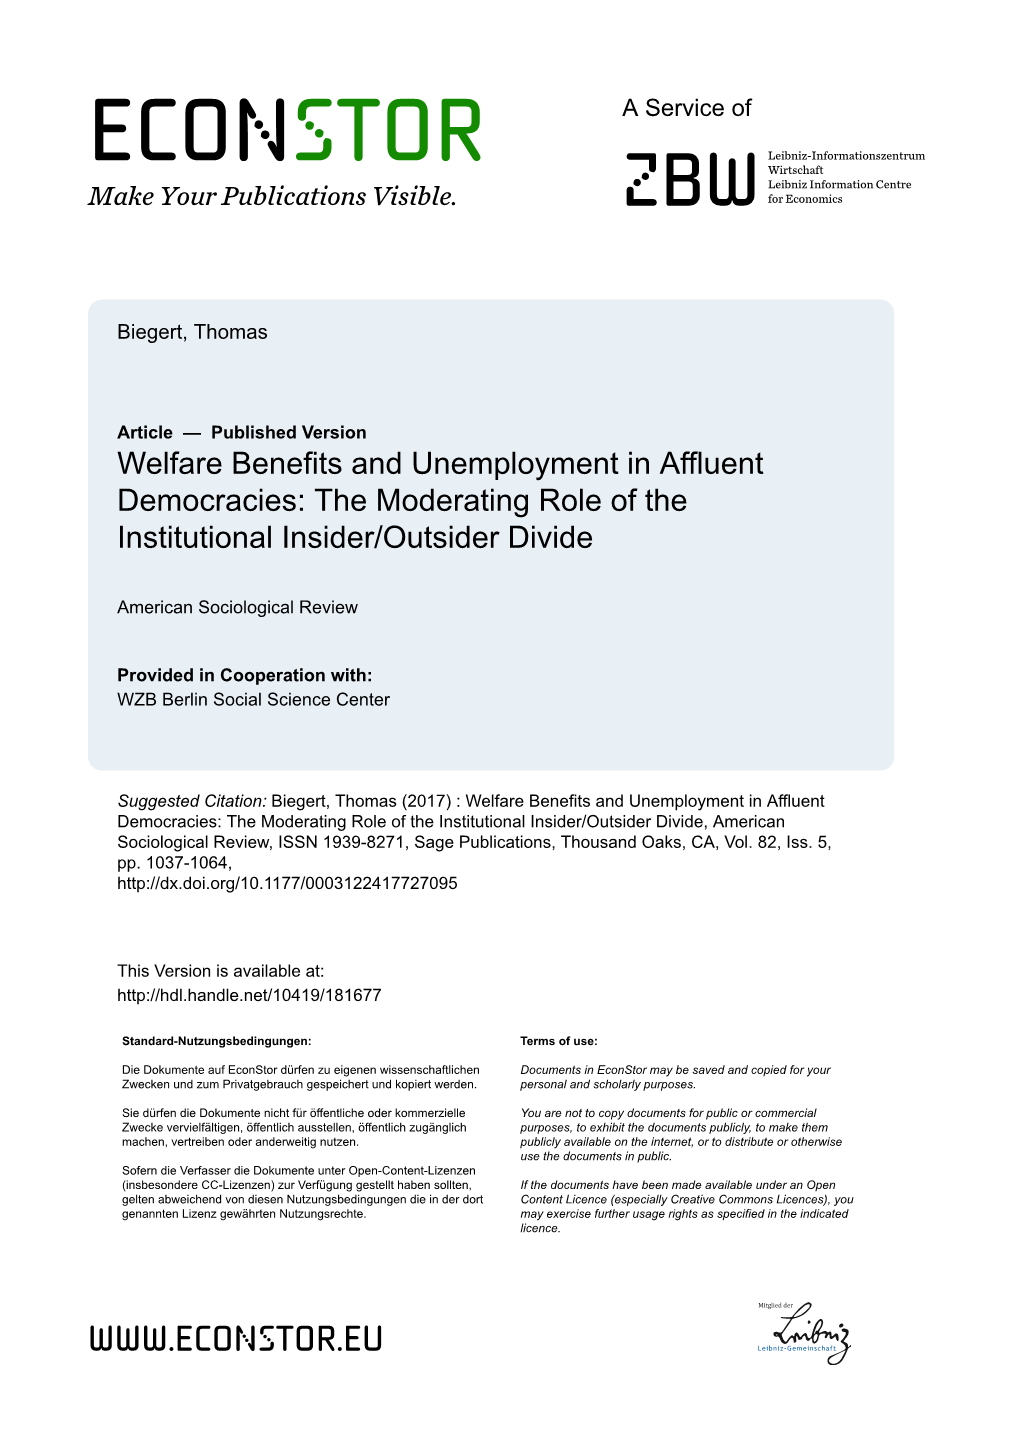 Welfare Benefits and Unemployment in Affluent Democracies: the Moderating Role of the Institutional Insider/Outsider Divide